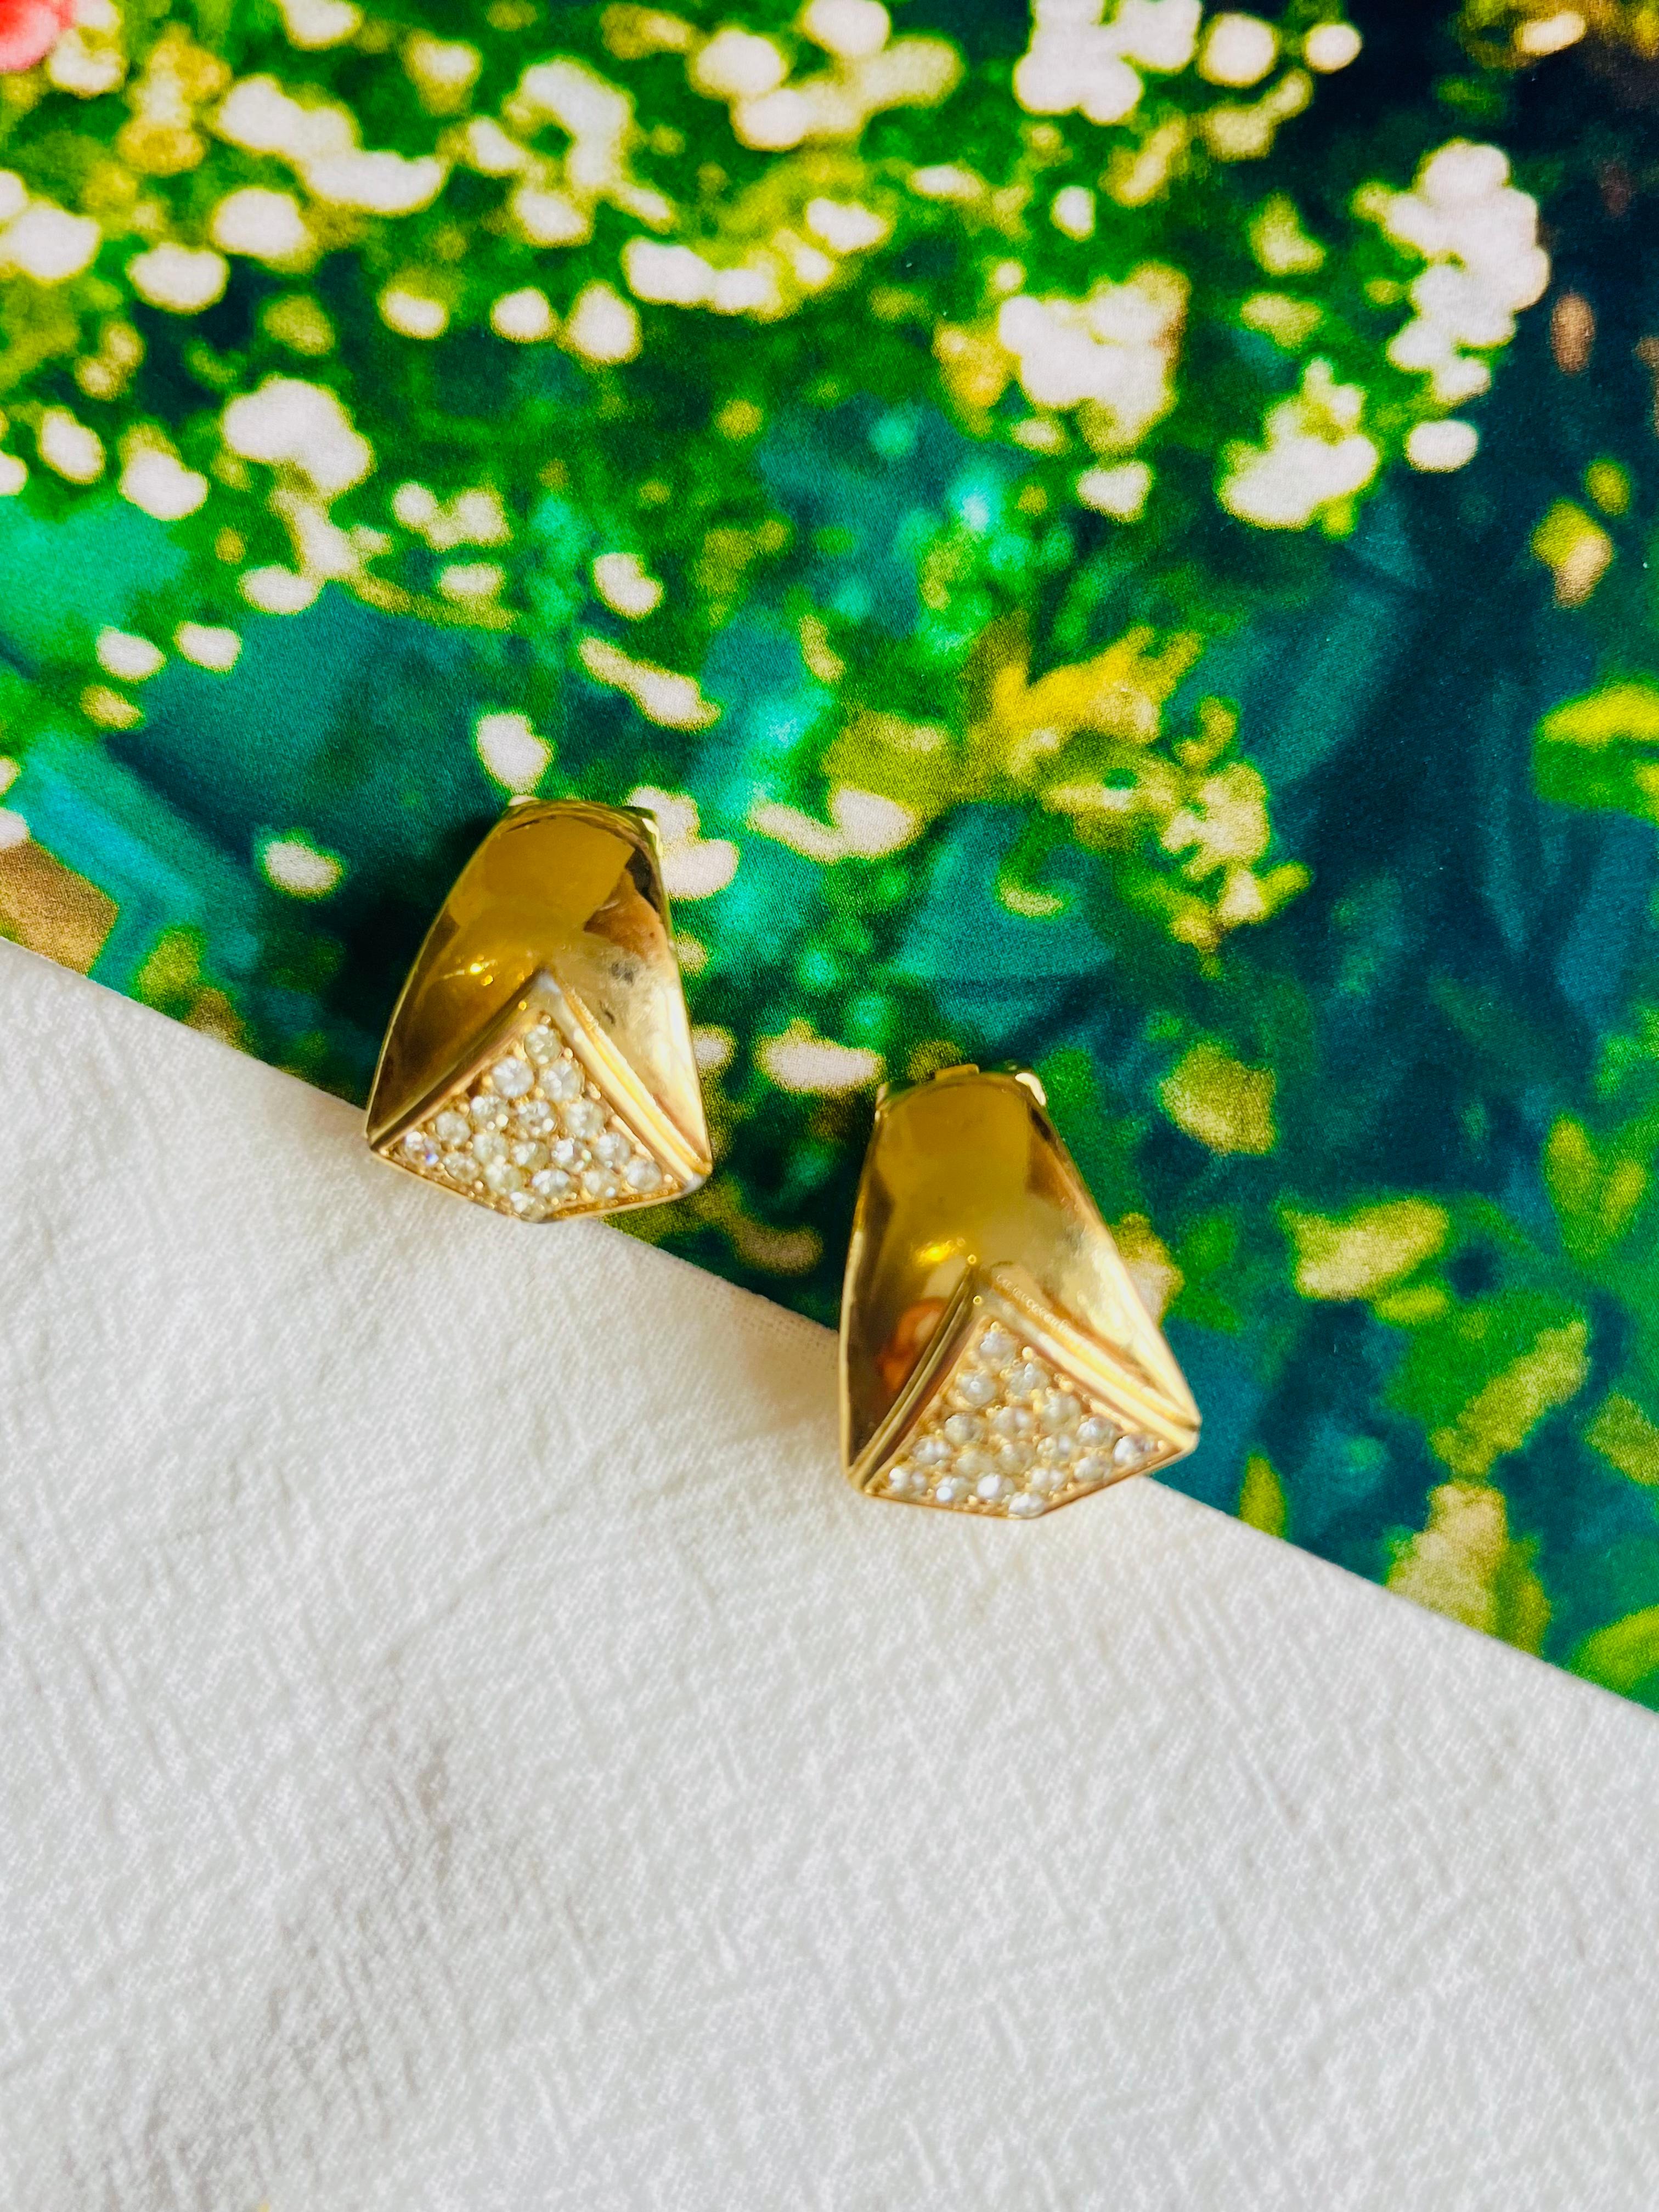 Very good condition. Some very light scratches and colour loss. 100% genuine.

A very beautiful pair of clip on earrings by Chr. DIOR, signed at the back.

Size: 2.2*1.8cm.

Weight: 9.0 g/each.

_ _ _

Great for everyday wear. Come with velvet pouch